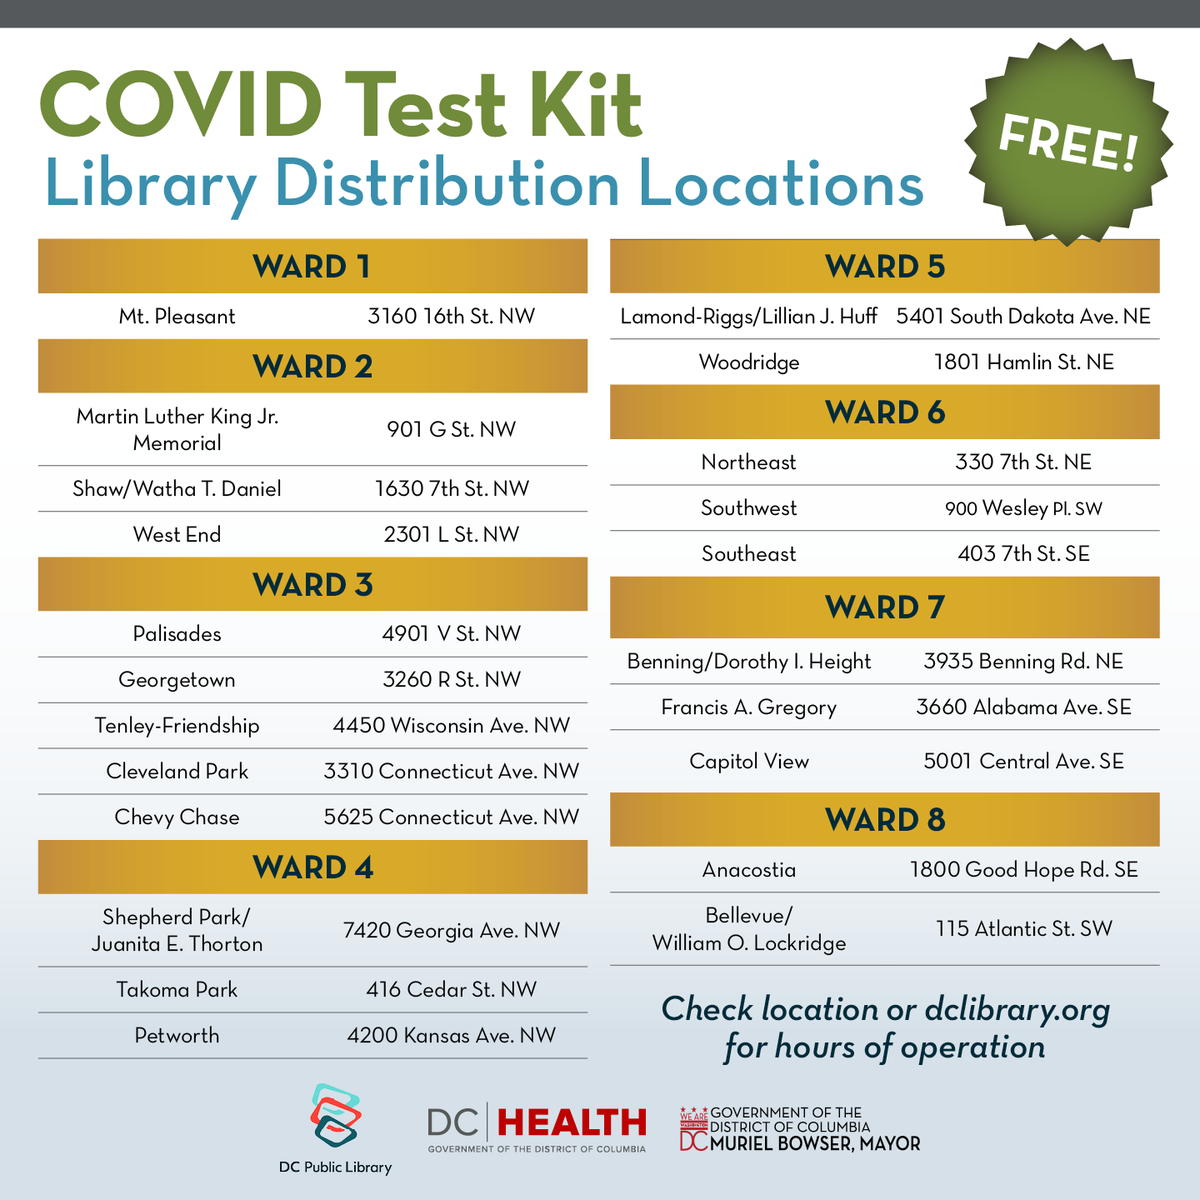 Starting today, you can get a free COVID-19 rapid test kit @dcpl. Check your desired location or dclibrary.org for hours of operation.